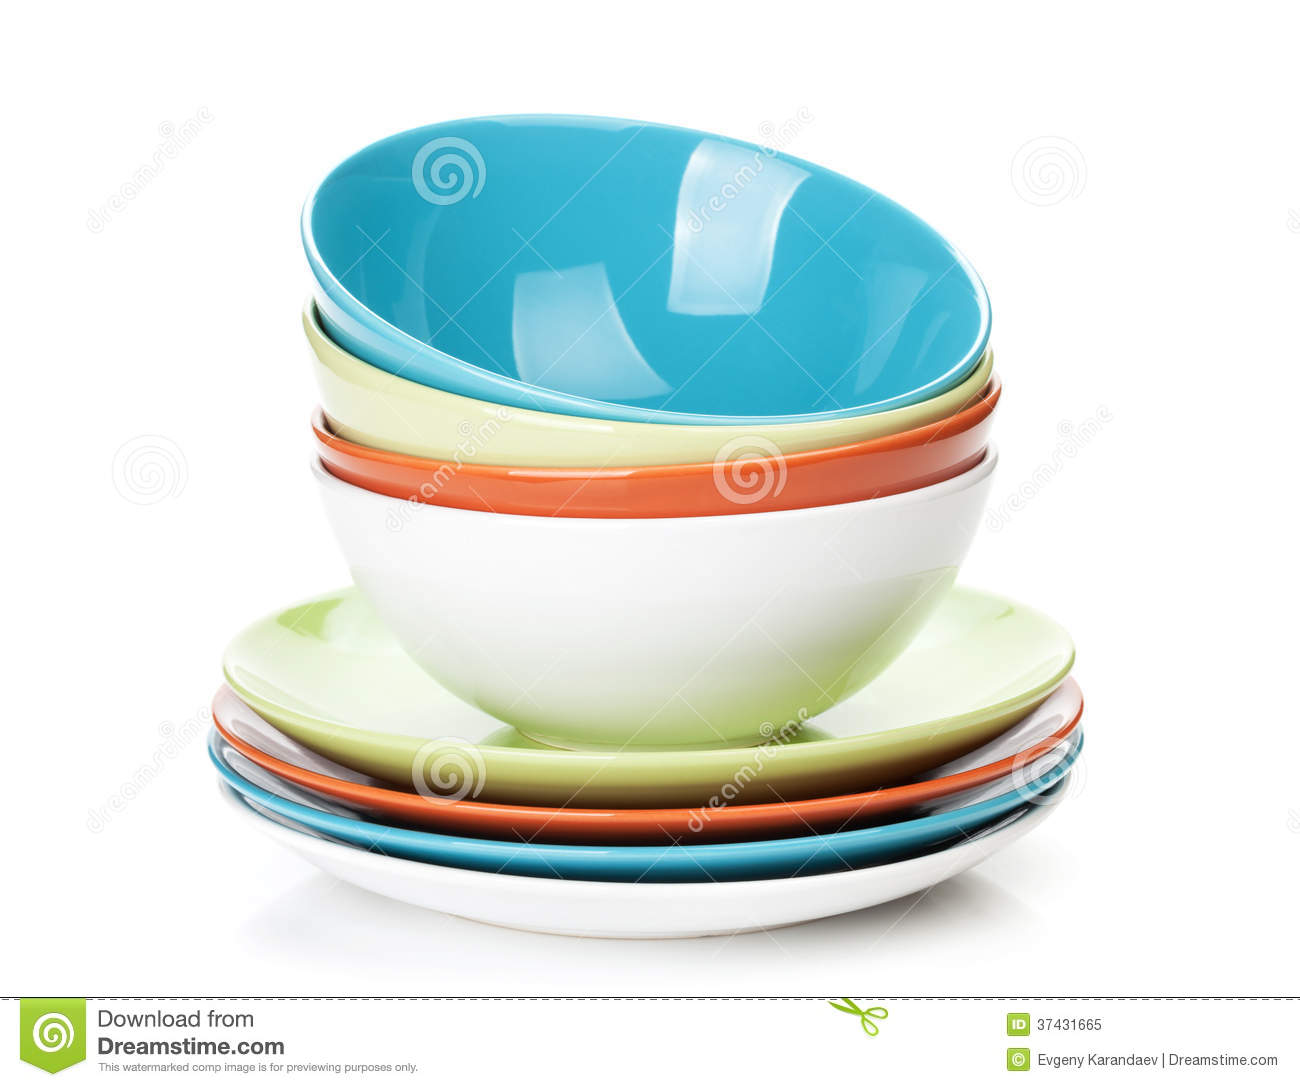 bowl clipart plate